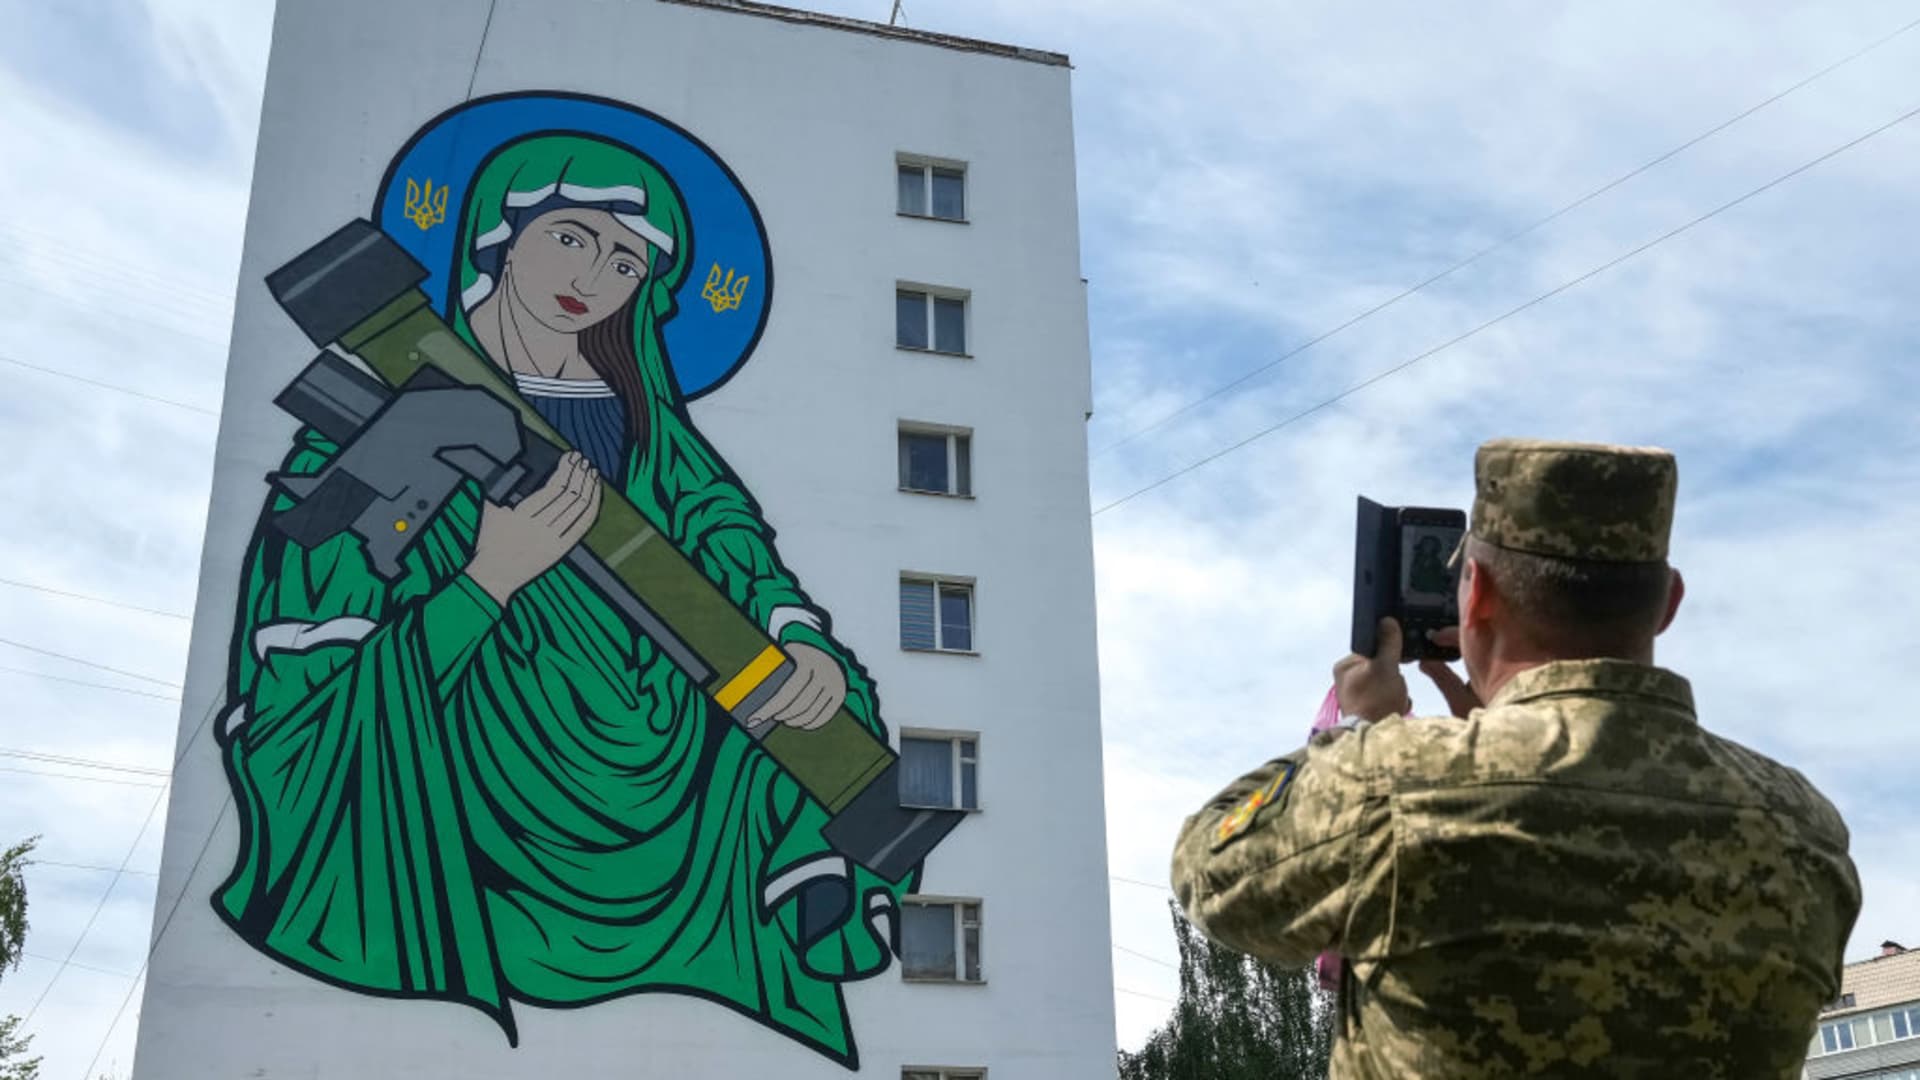 Ukrainian soldiers take pictures of a mural titled 'Saint Javelin' dedicated to the British portable surface-to-air missile has been unveiled on the side of a Kyiv apartment block on May 25, 2022 in Kyiv, Ukraine. The artwork by illustrator and artist Chris Shaw is in reference to the Javelin missile donated to Ukrainian troops to battle against the Russian invasion.